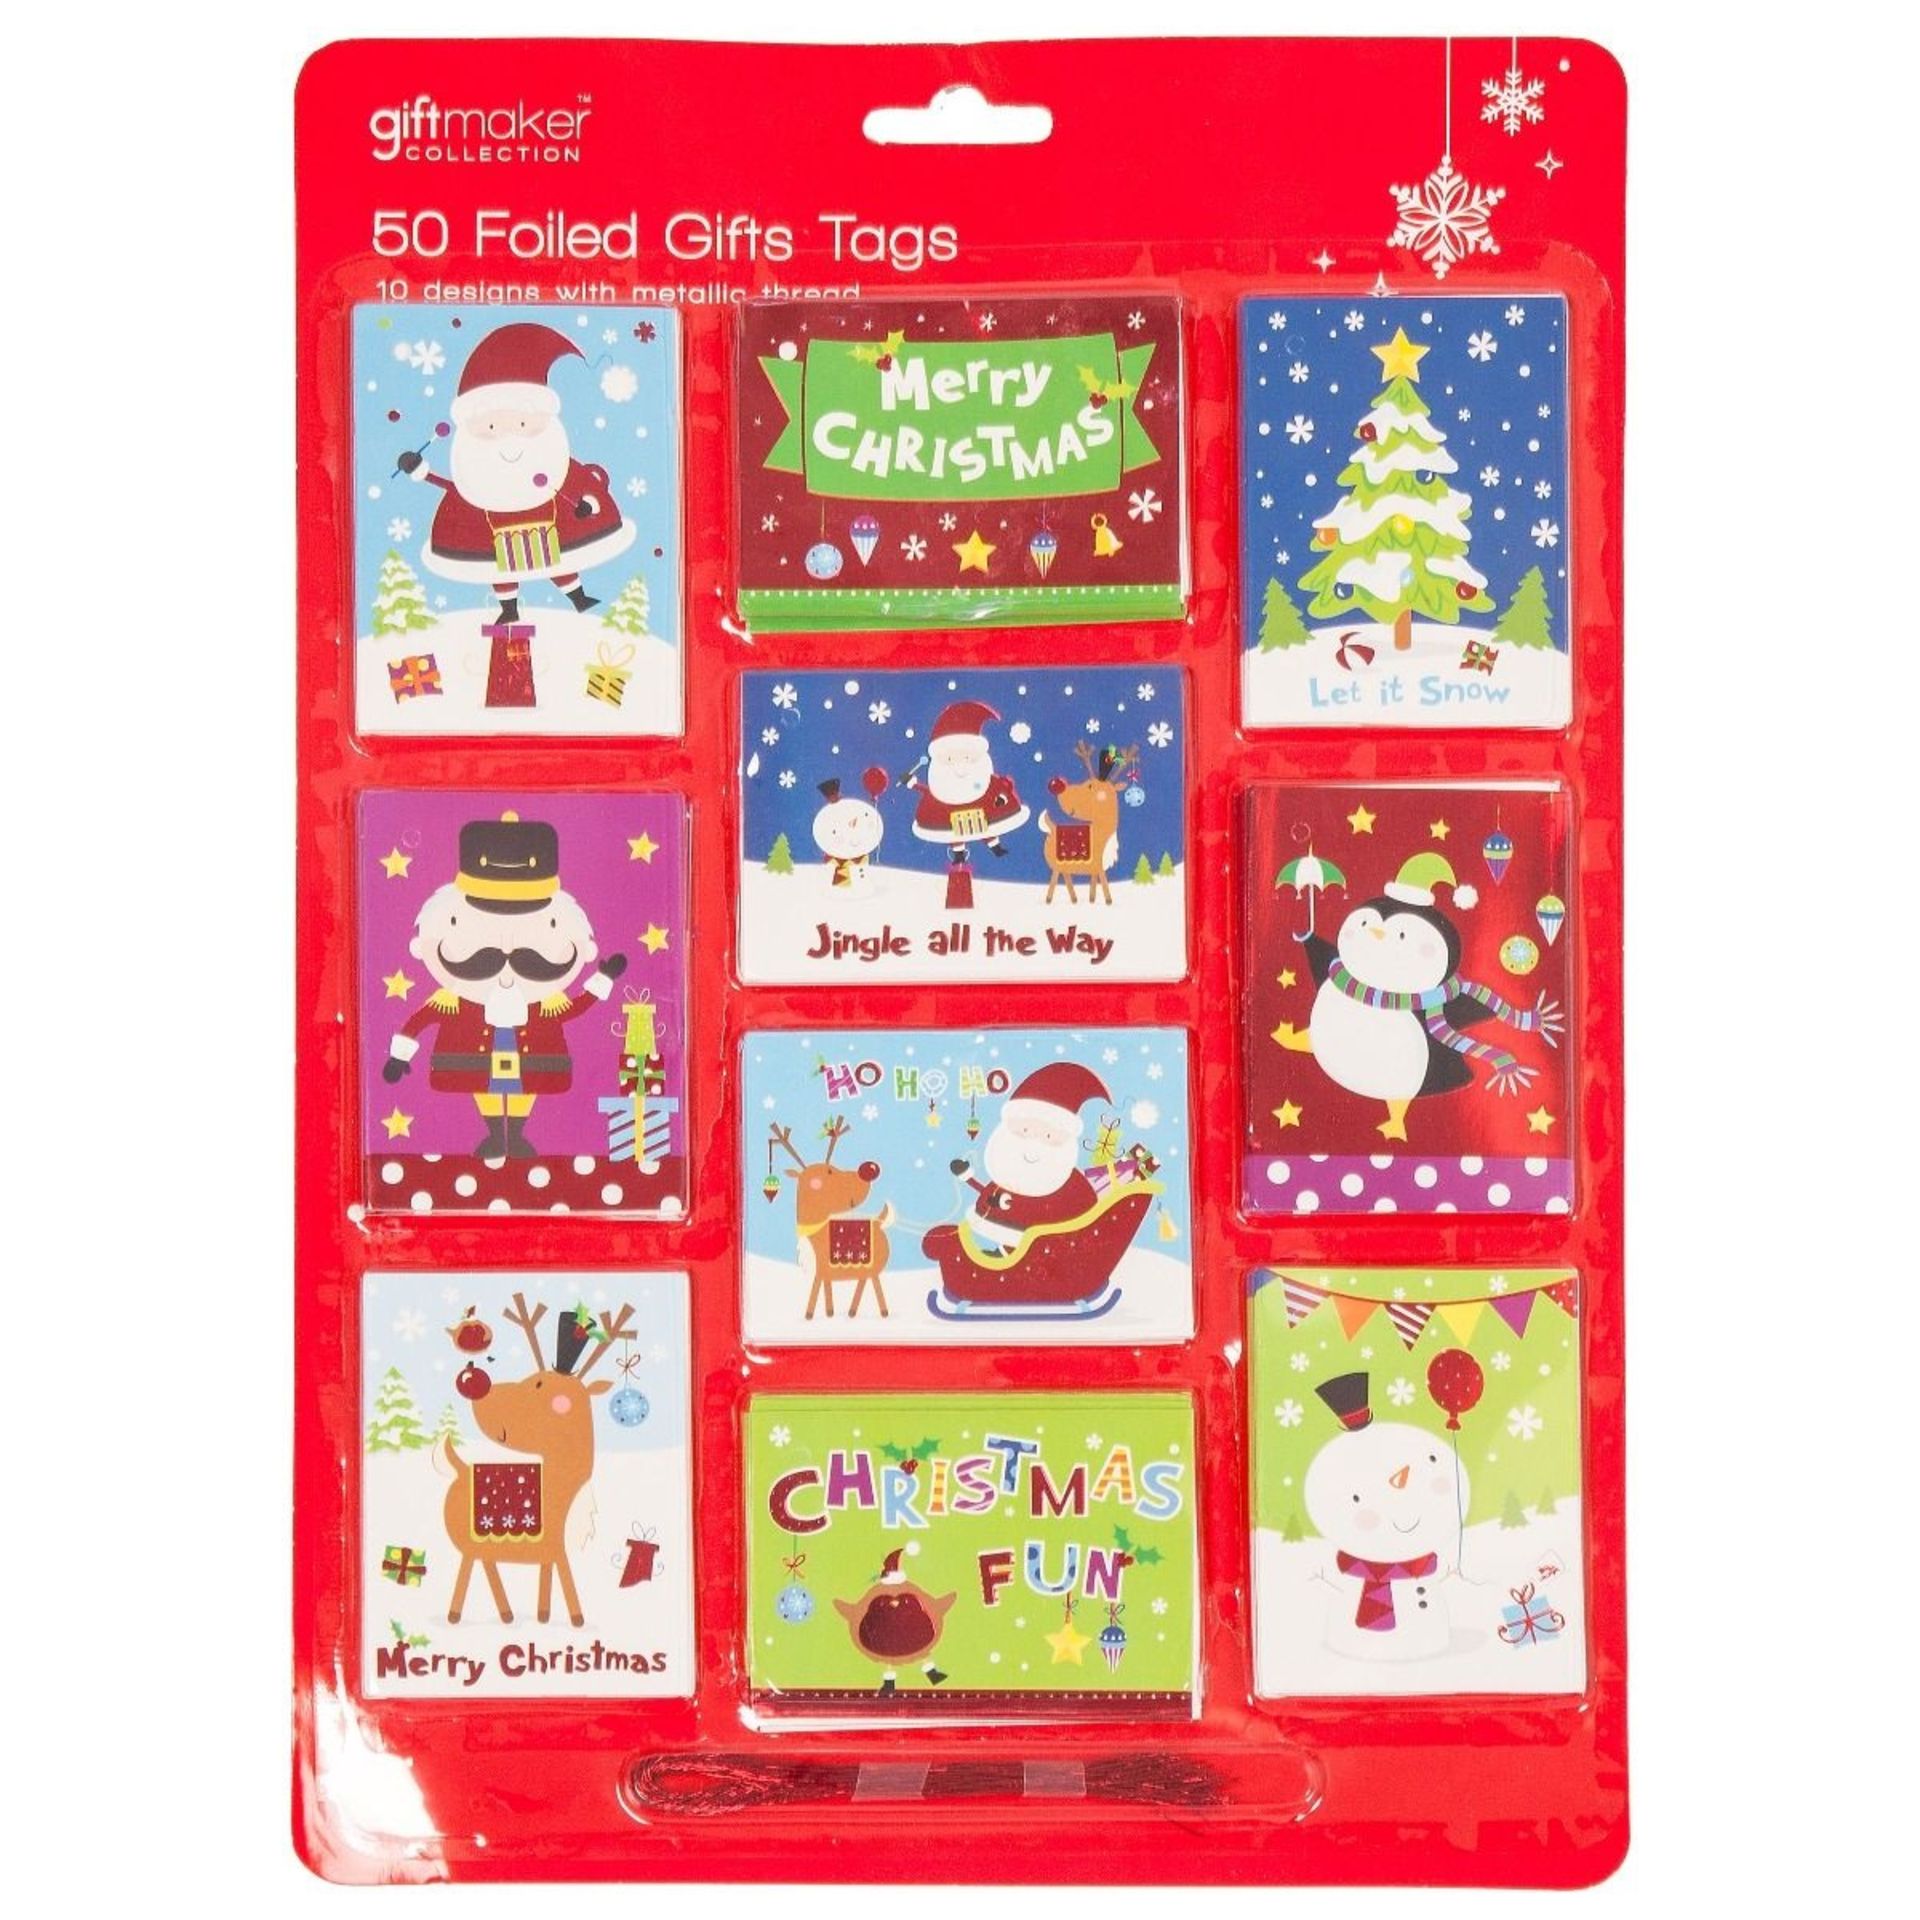 1000 x Assorted Christmas Gift Wrap, Tags, Décor, Bunting |RRP £1 - £3.99 each